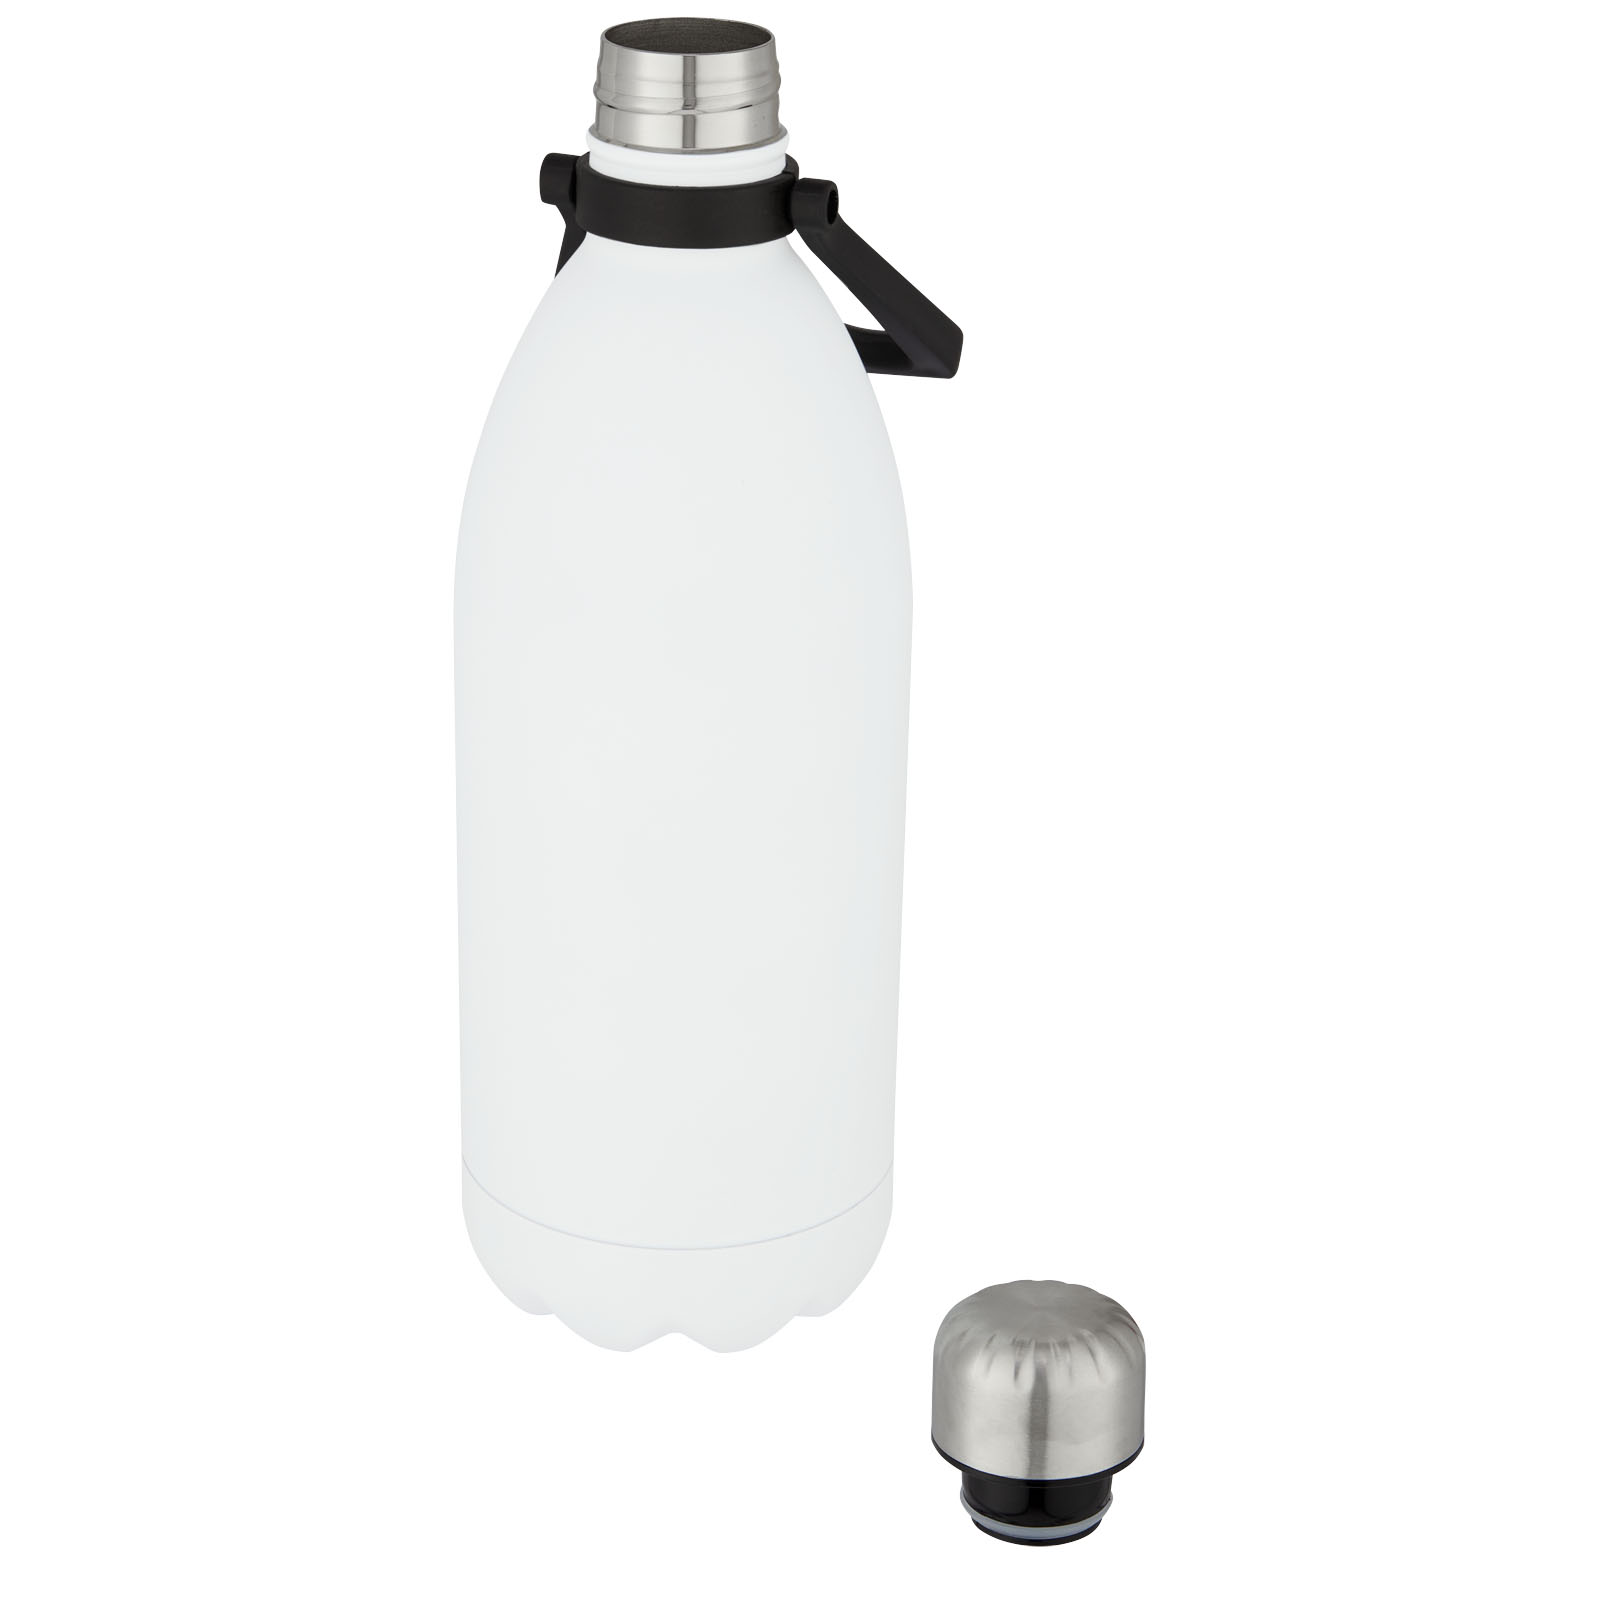 Advertising Insulated mugs - Cove 1.5 L vacuum insulated stainless steel bottle - 2